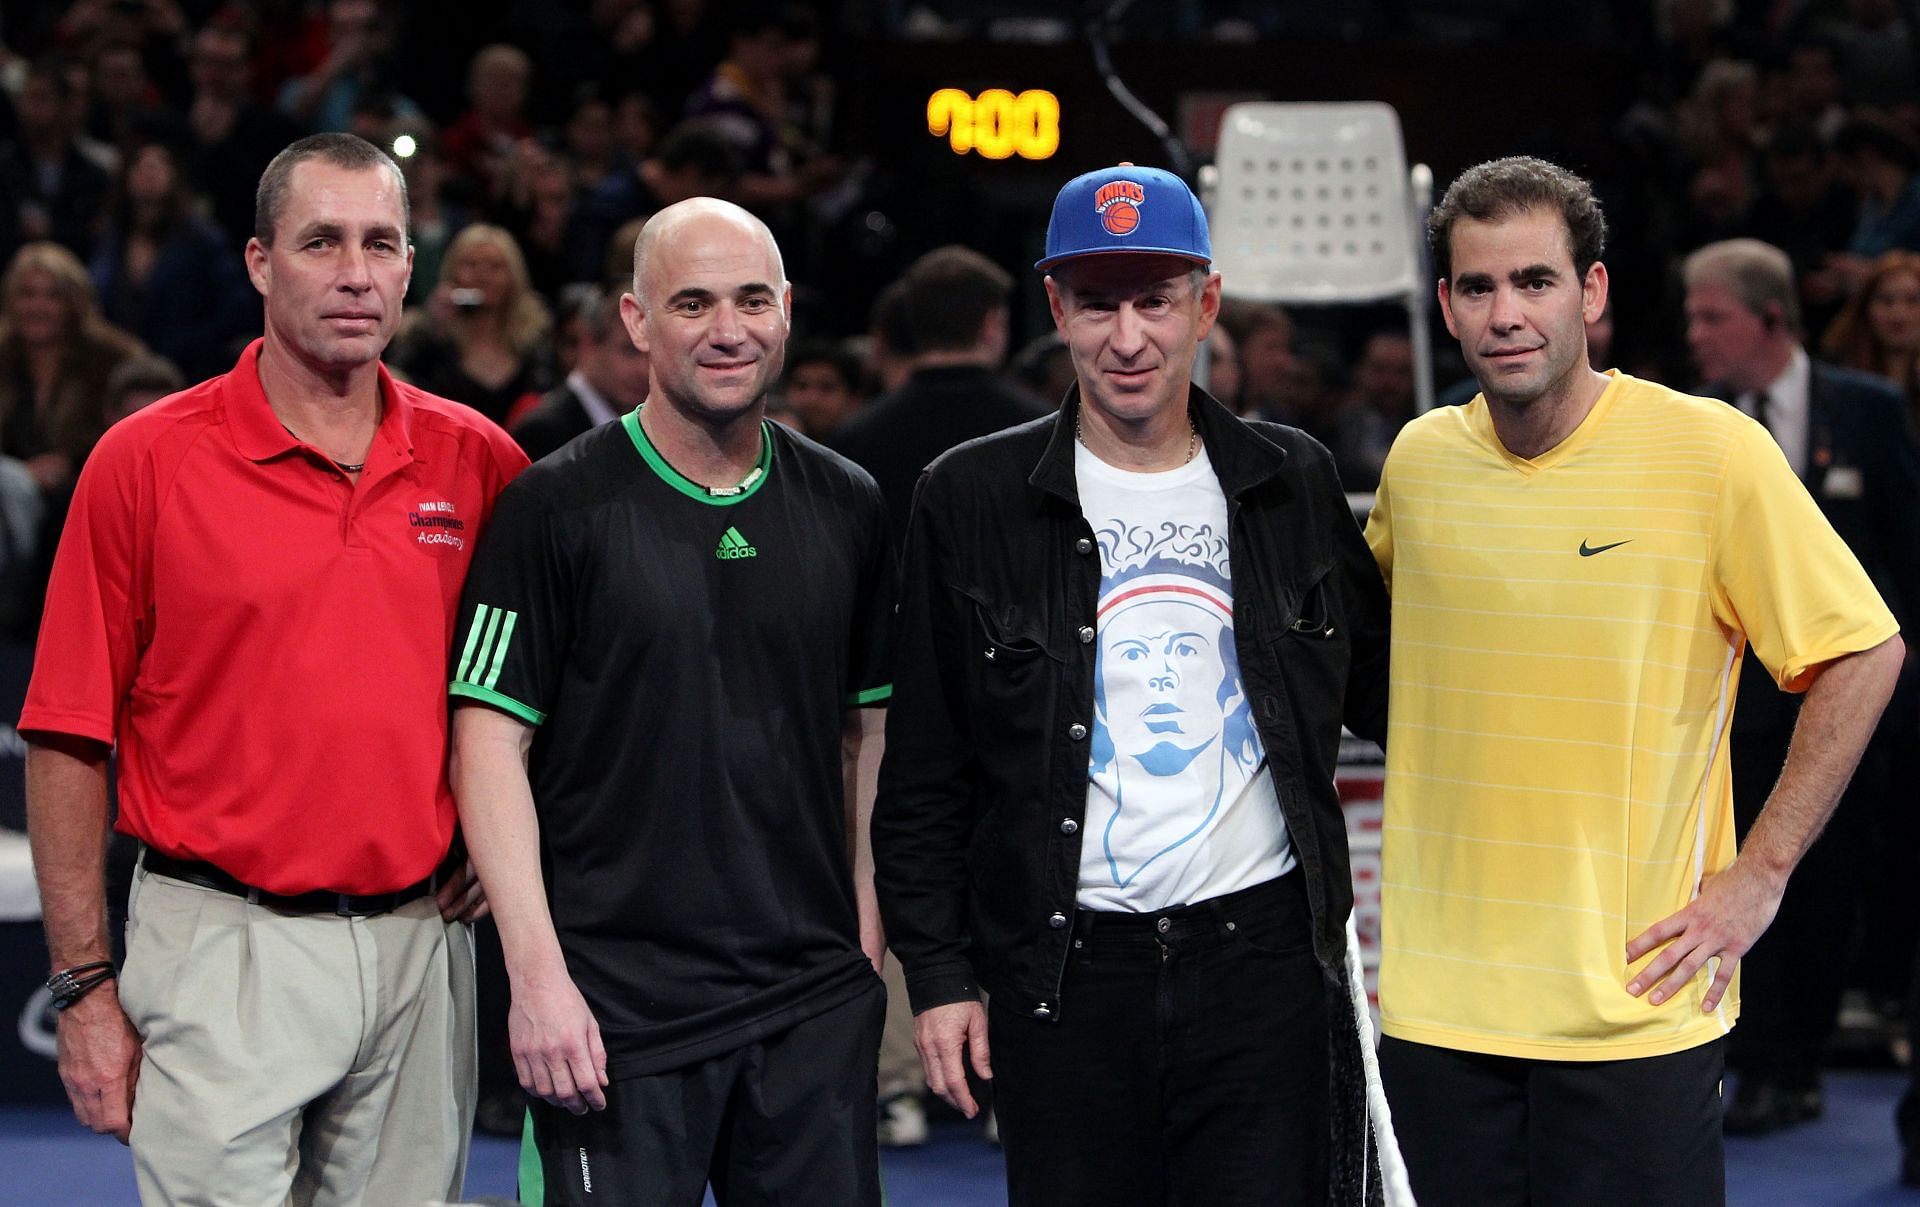 Pete Sampras and Andre Agassi with Ivan Lendl and John McEnroe in 2011.